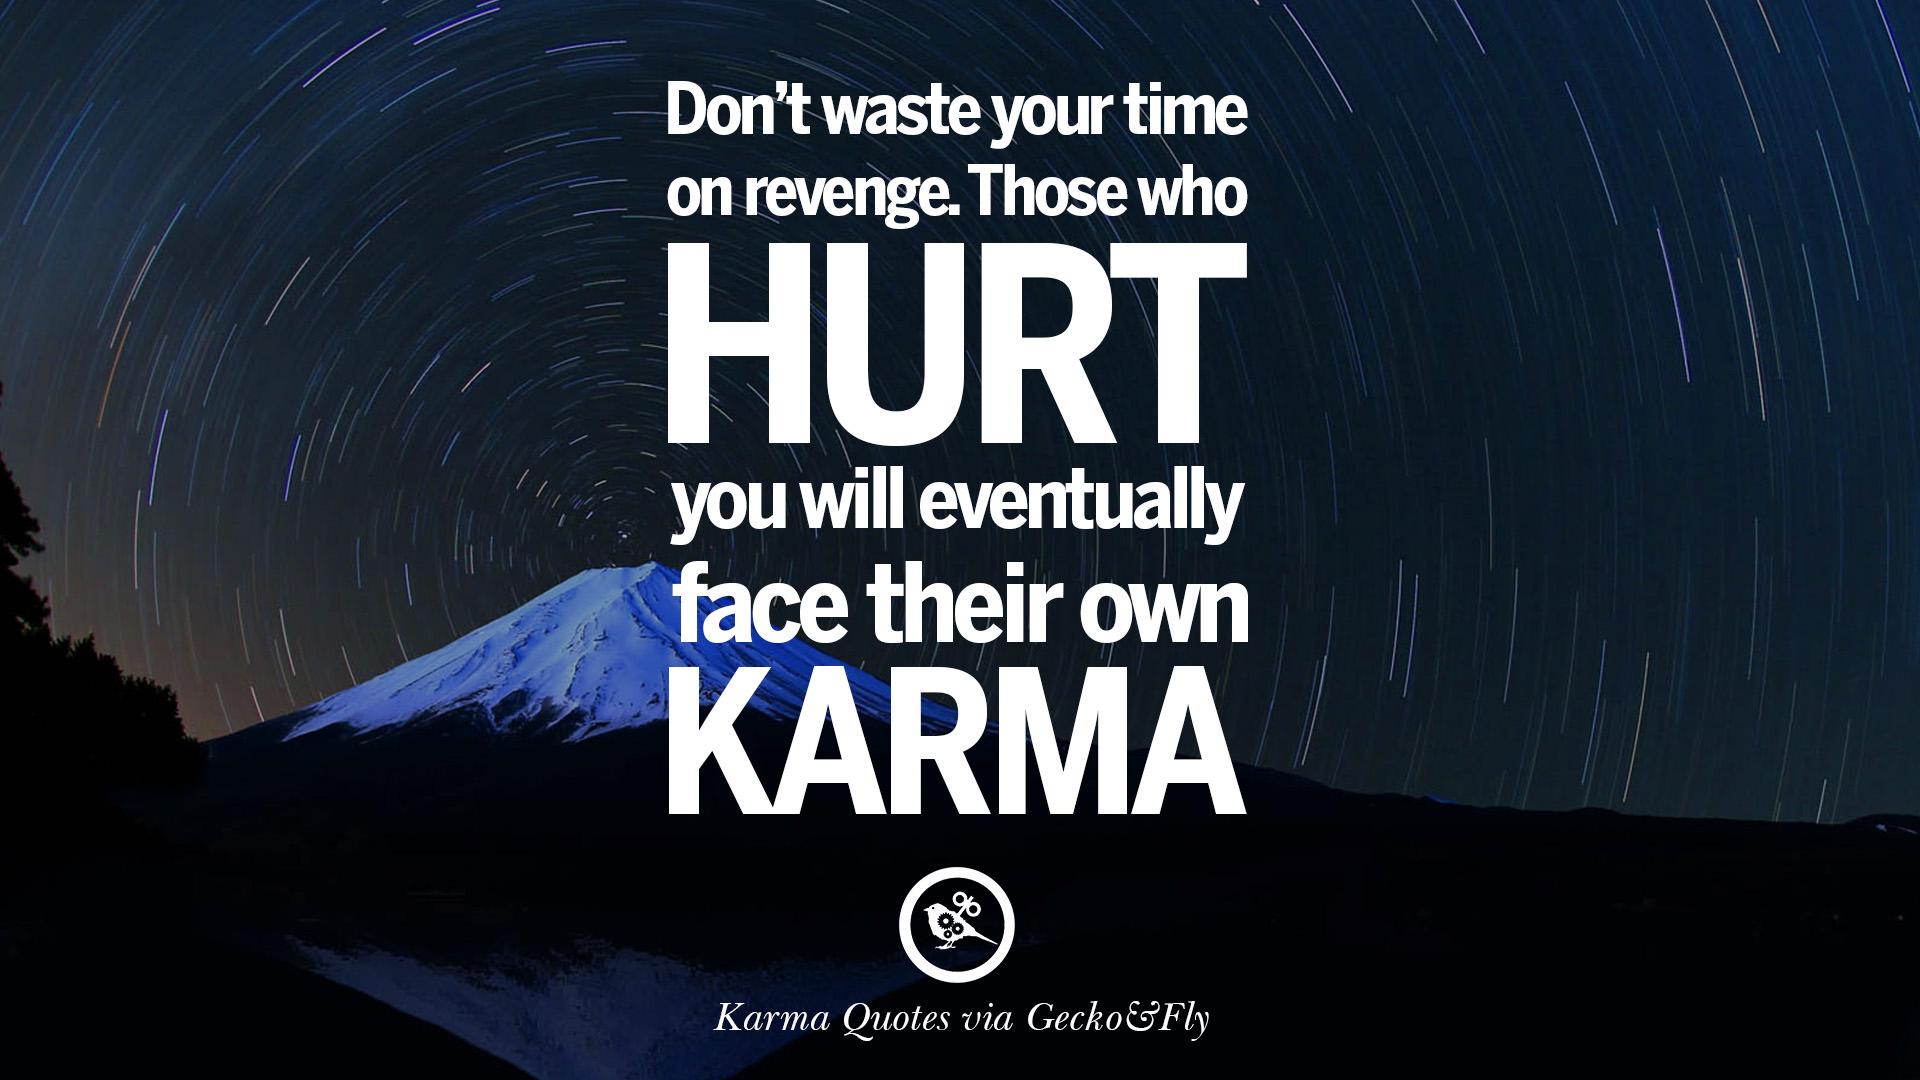 18 Good Karma Quotes On Relationship, Revenge And Life